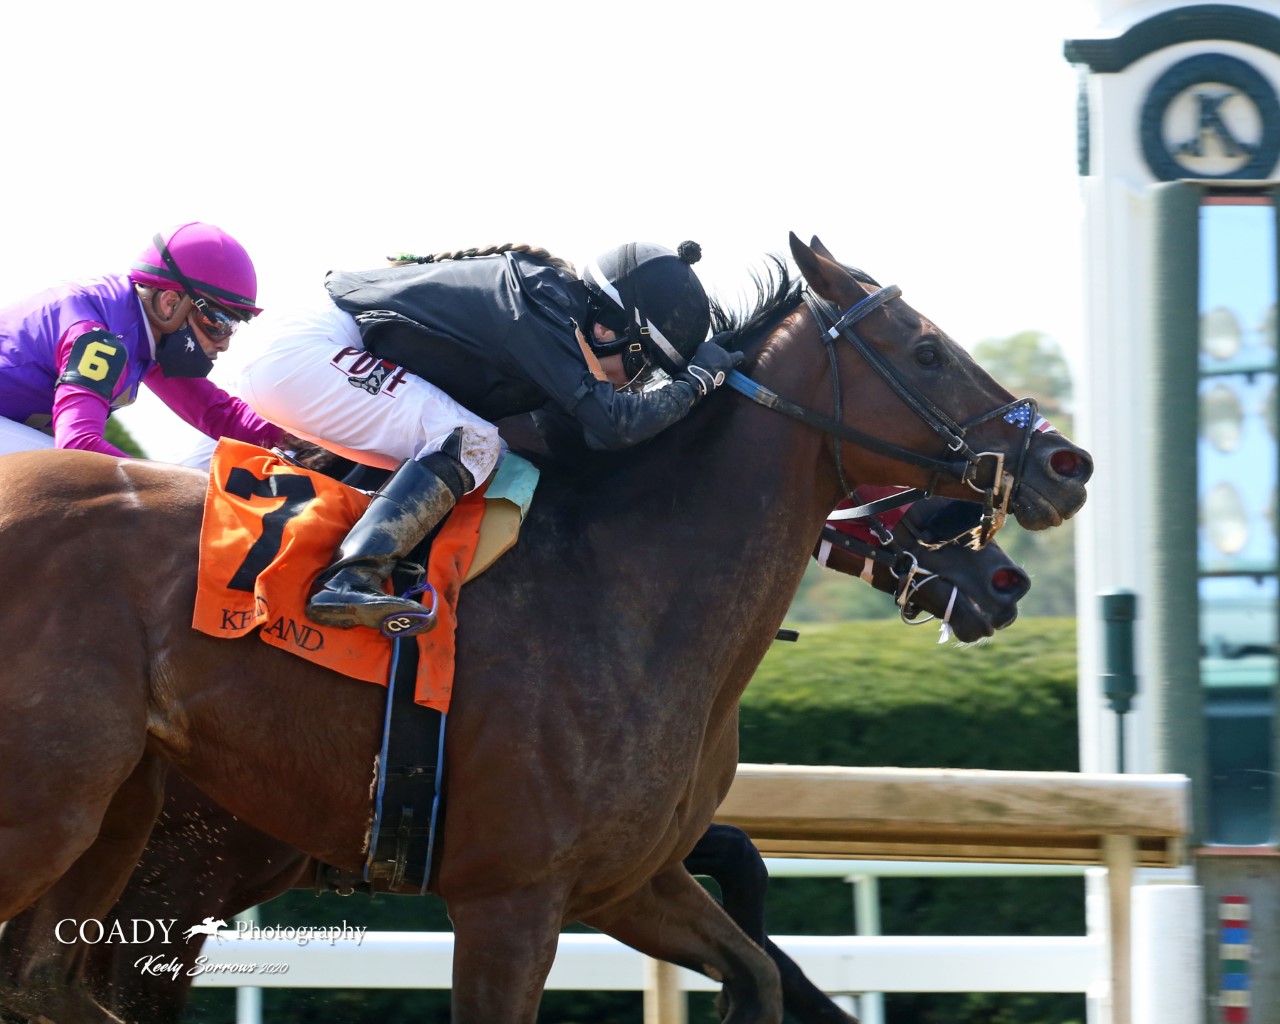 In action on the racetrack: Chel-c Bailey (7) drives home a winner at Keeneland. Photo: Keely Sorrows/Coady Photography